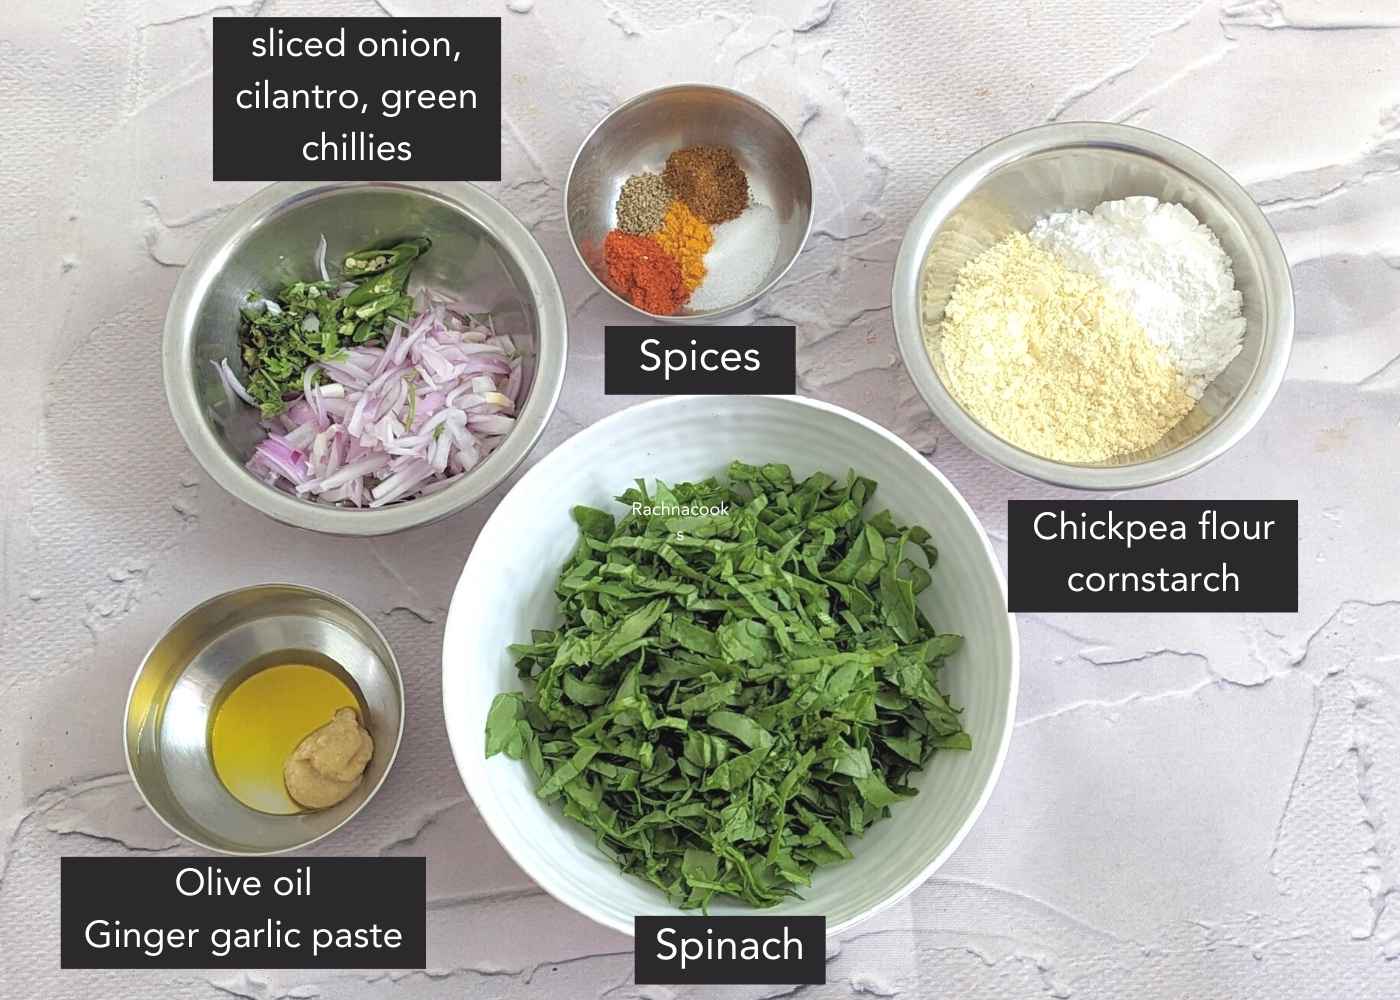 Ingredients for spinach pakora on a frame: spinach leaves, chopped onion, green chillies, cilantro, chickpea flour, cornstarch, spices, olive oil and ginger garlic paste in shallow bowls.